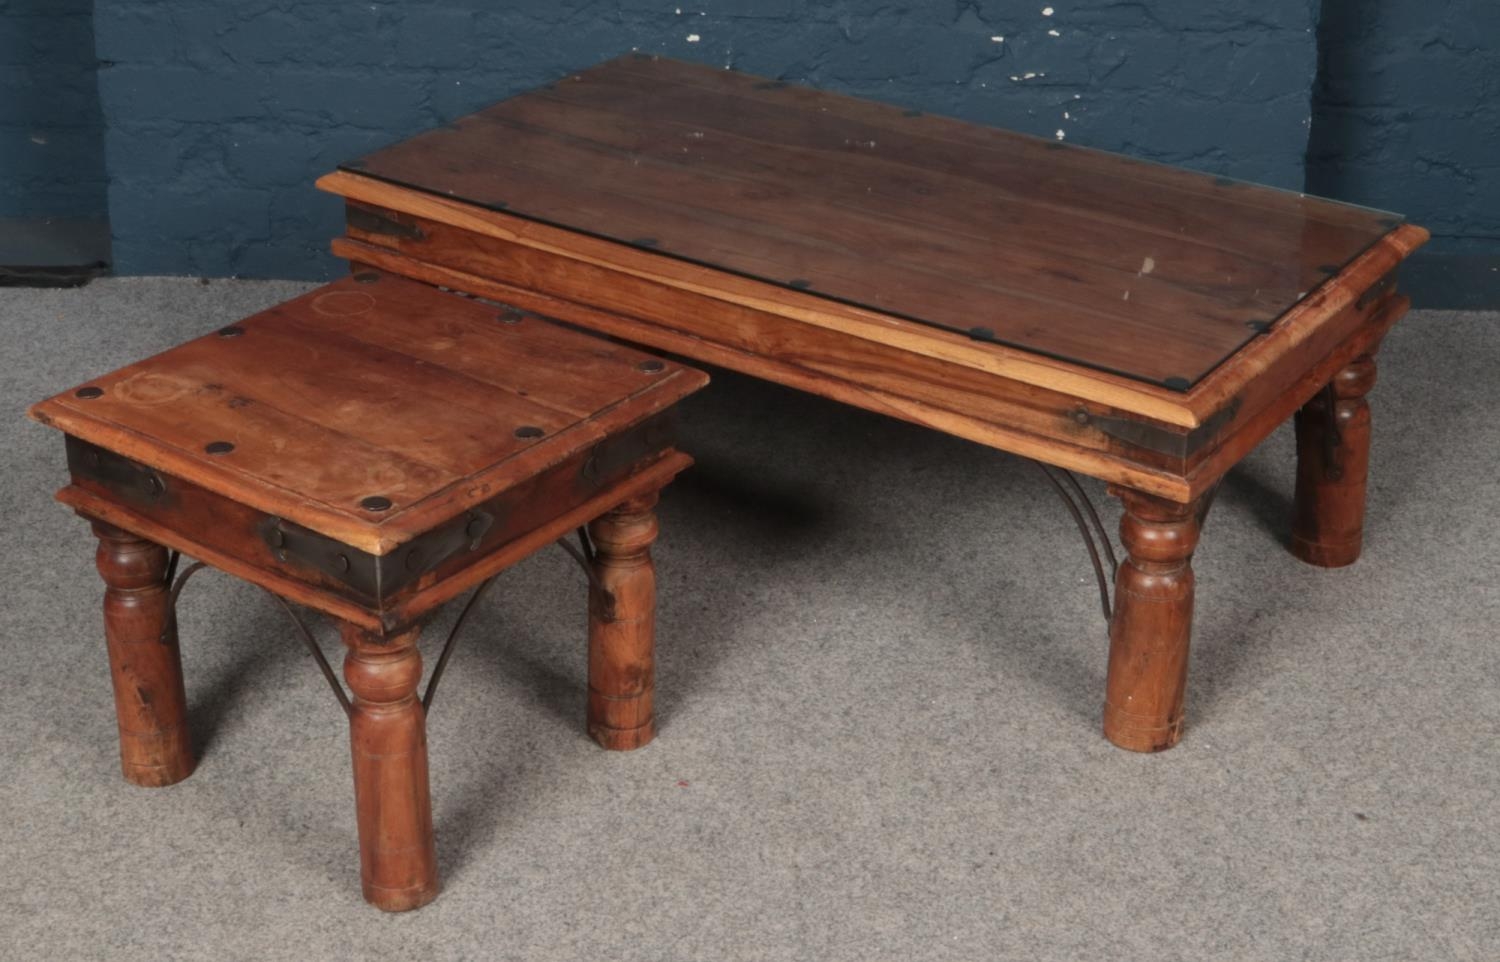 A Pair of Hardwood Coffee Tables with Hammered Decoration, One with Glass Table Top.